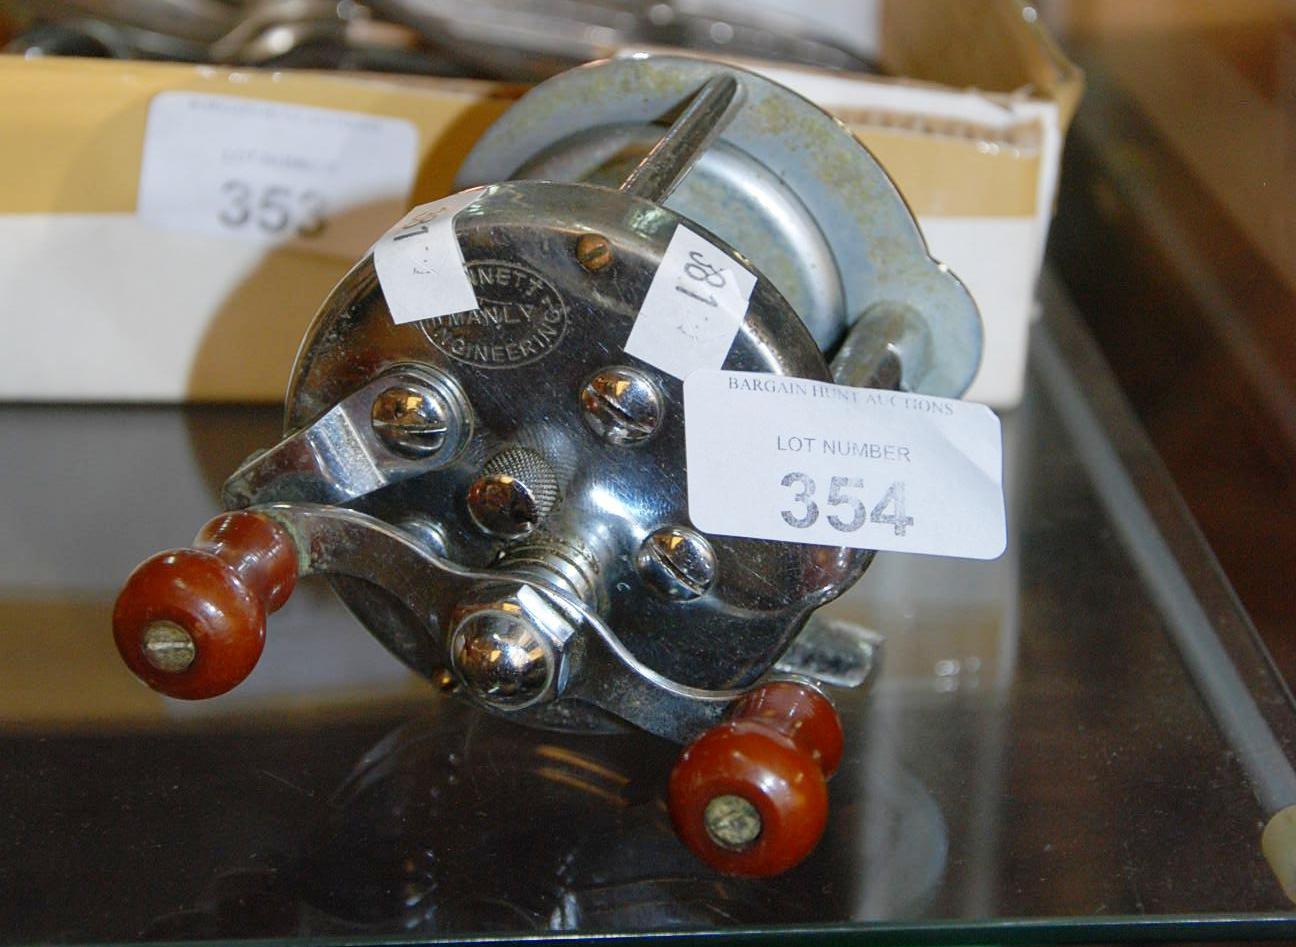 Vintage fishing reel made by Bennett Engineering - Bargain Hunt Auctions